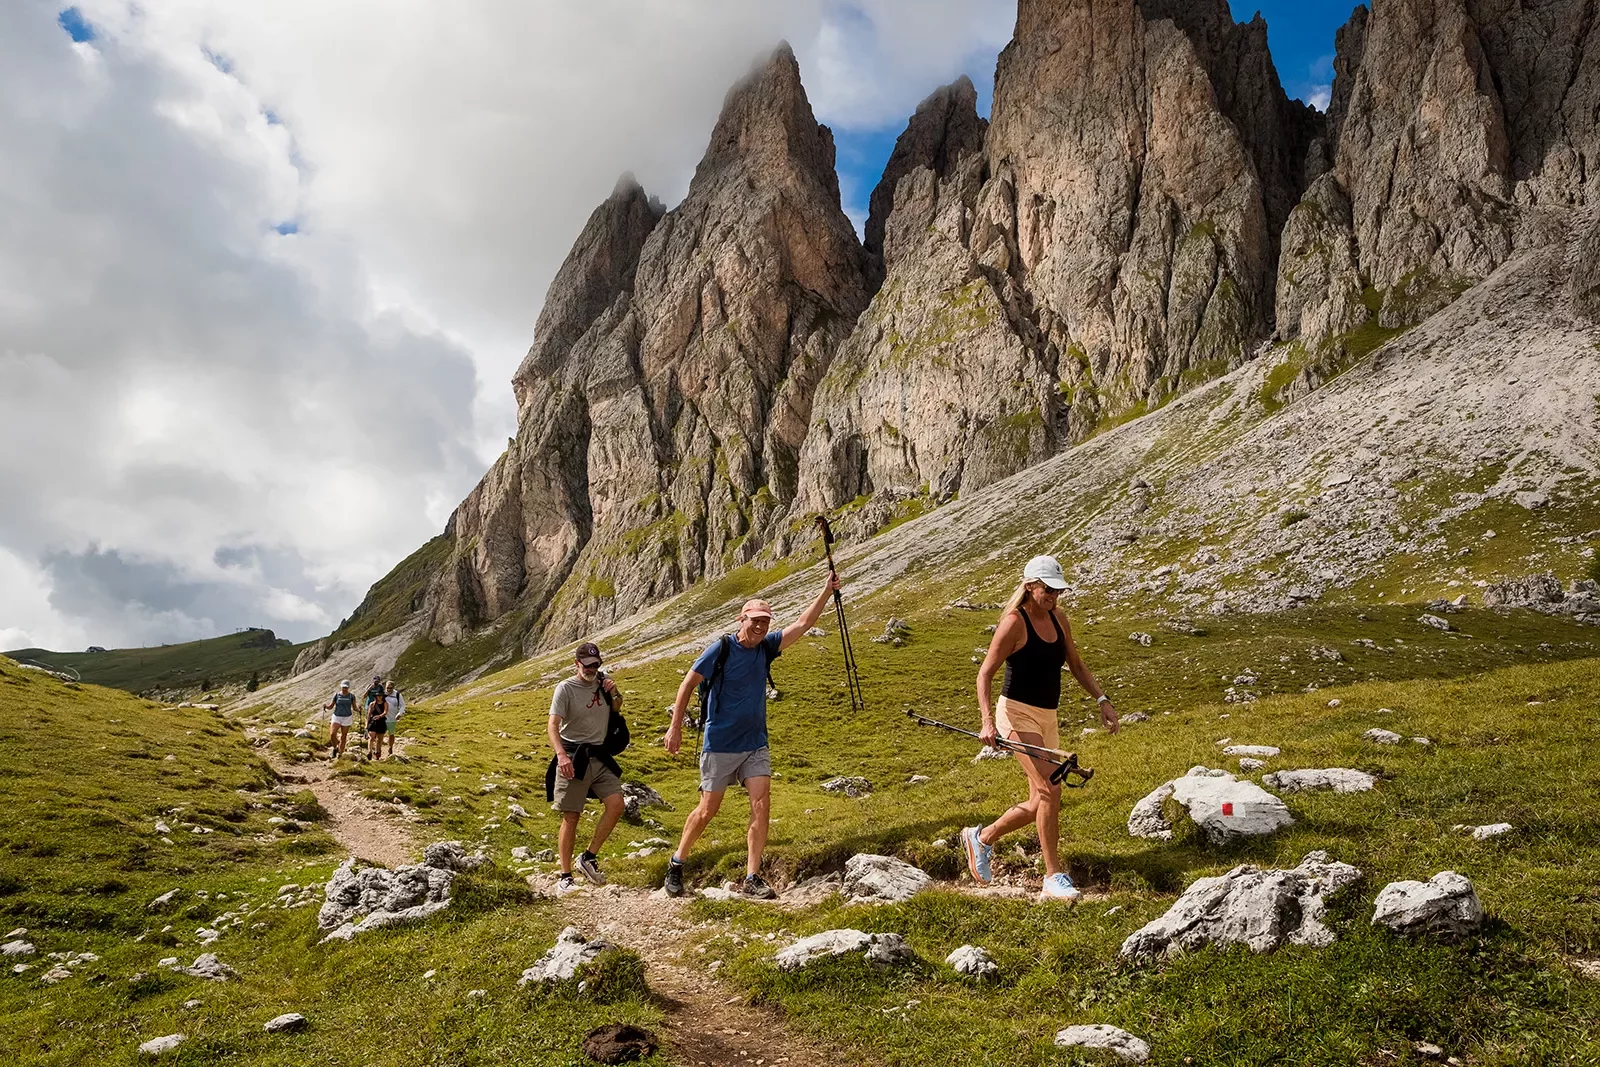 Hikers walking up a path near mountains